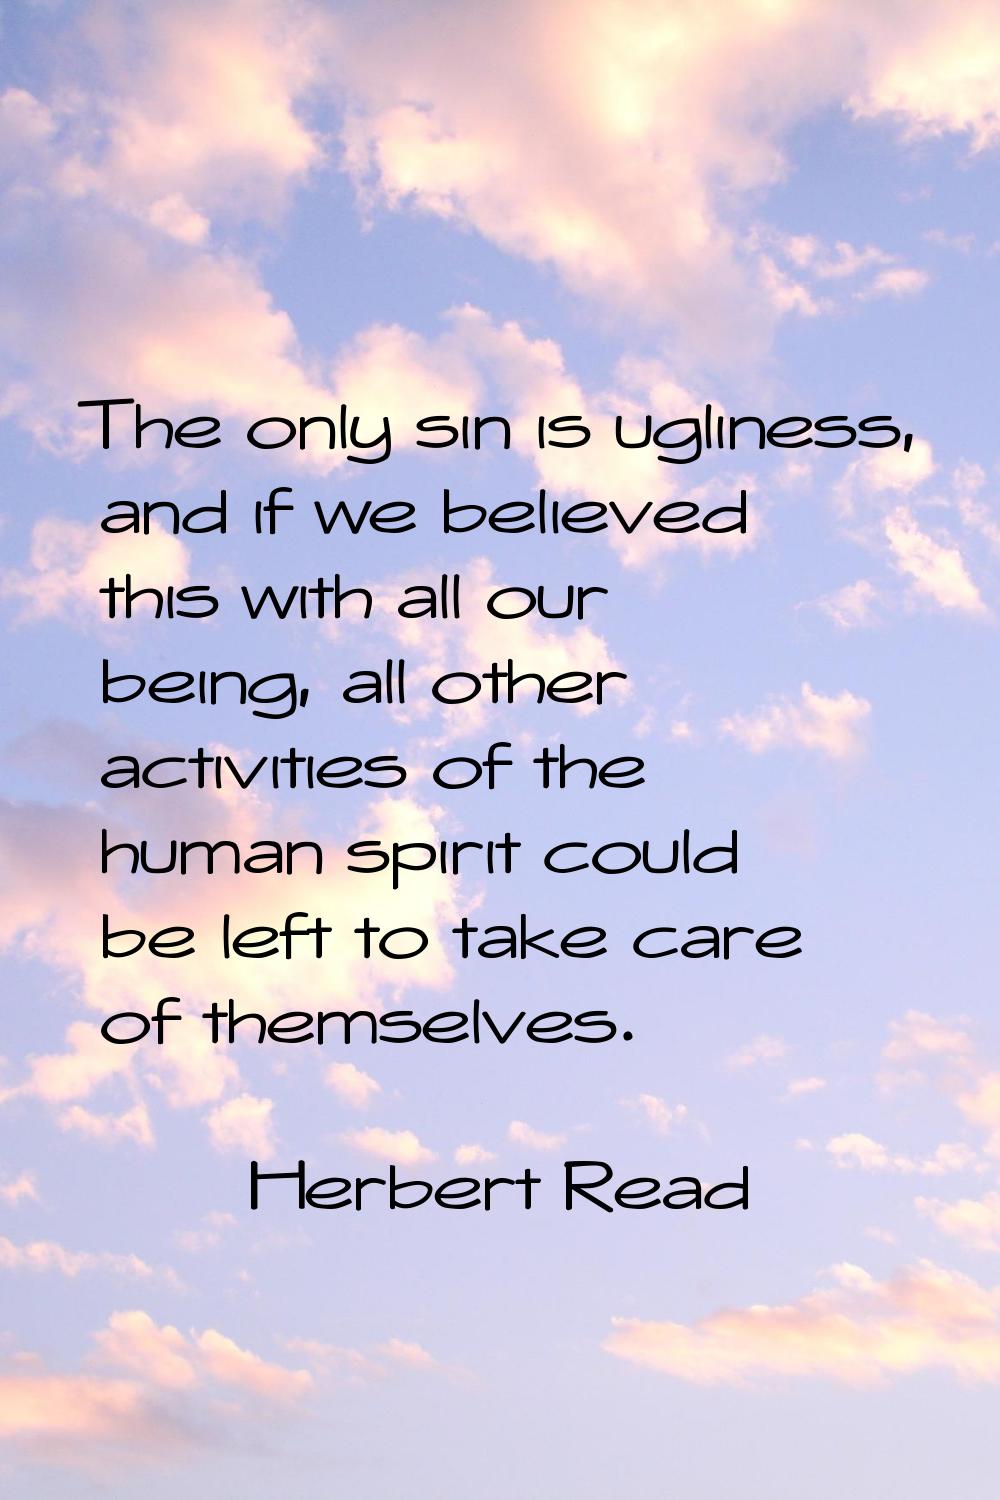 The only sin is ugliness, and if we believed this with all our being, all other activities of the h